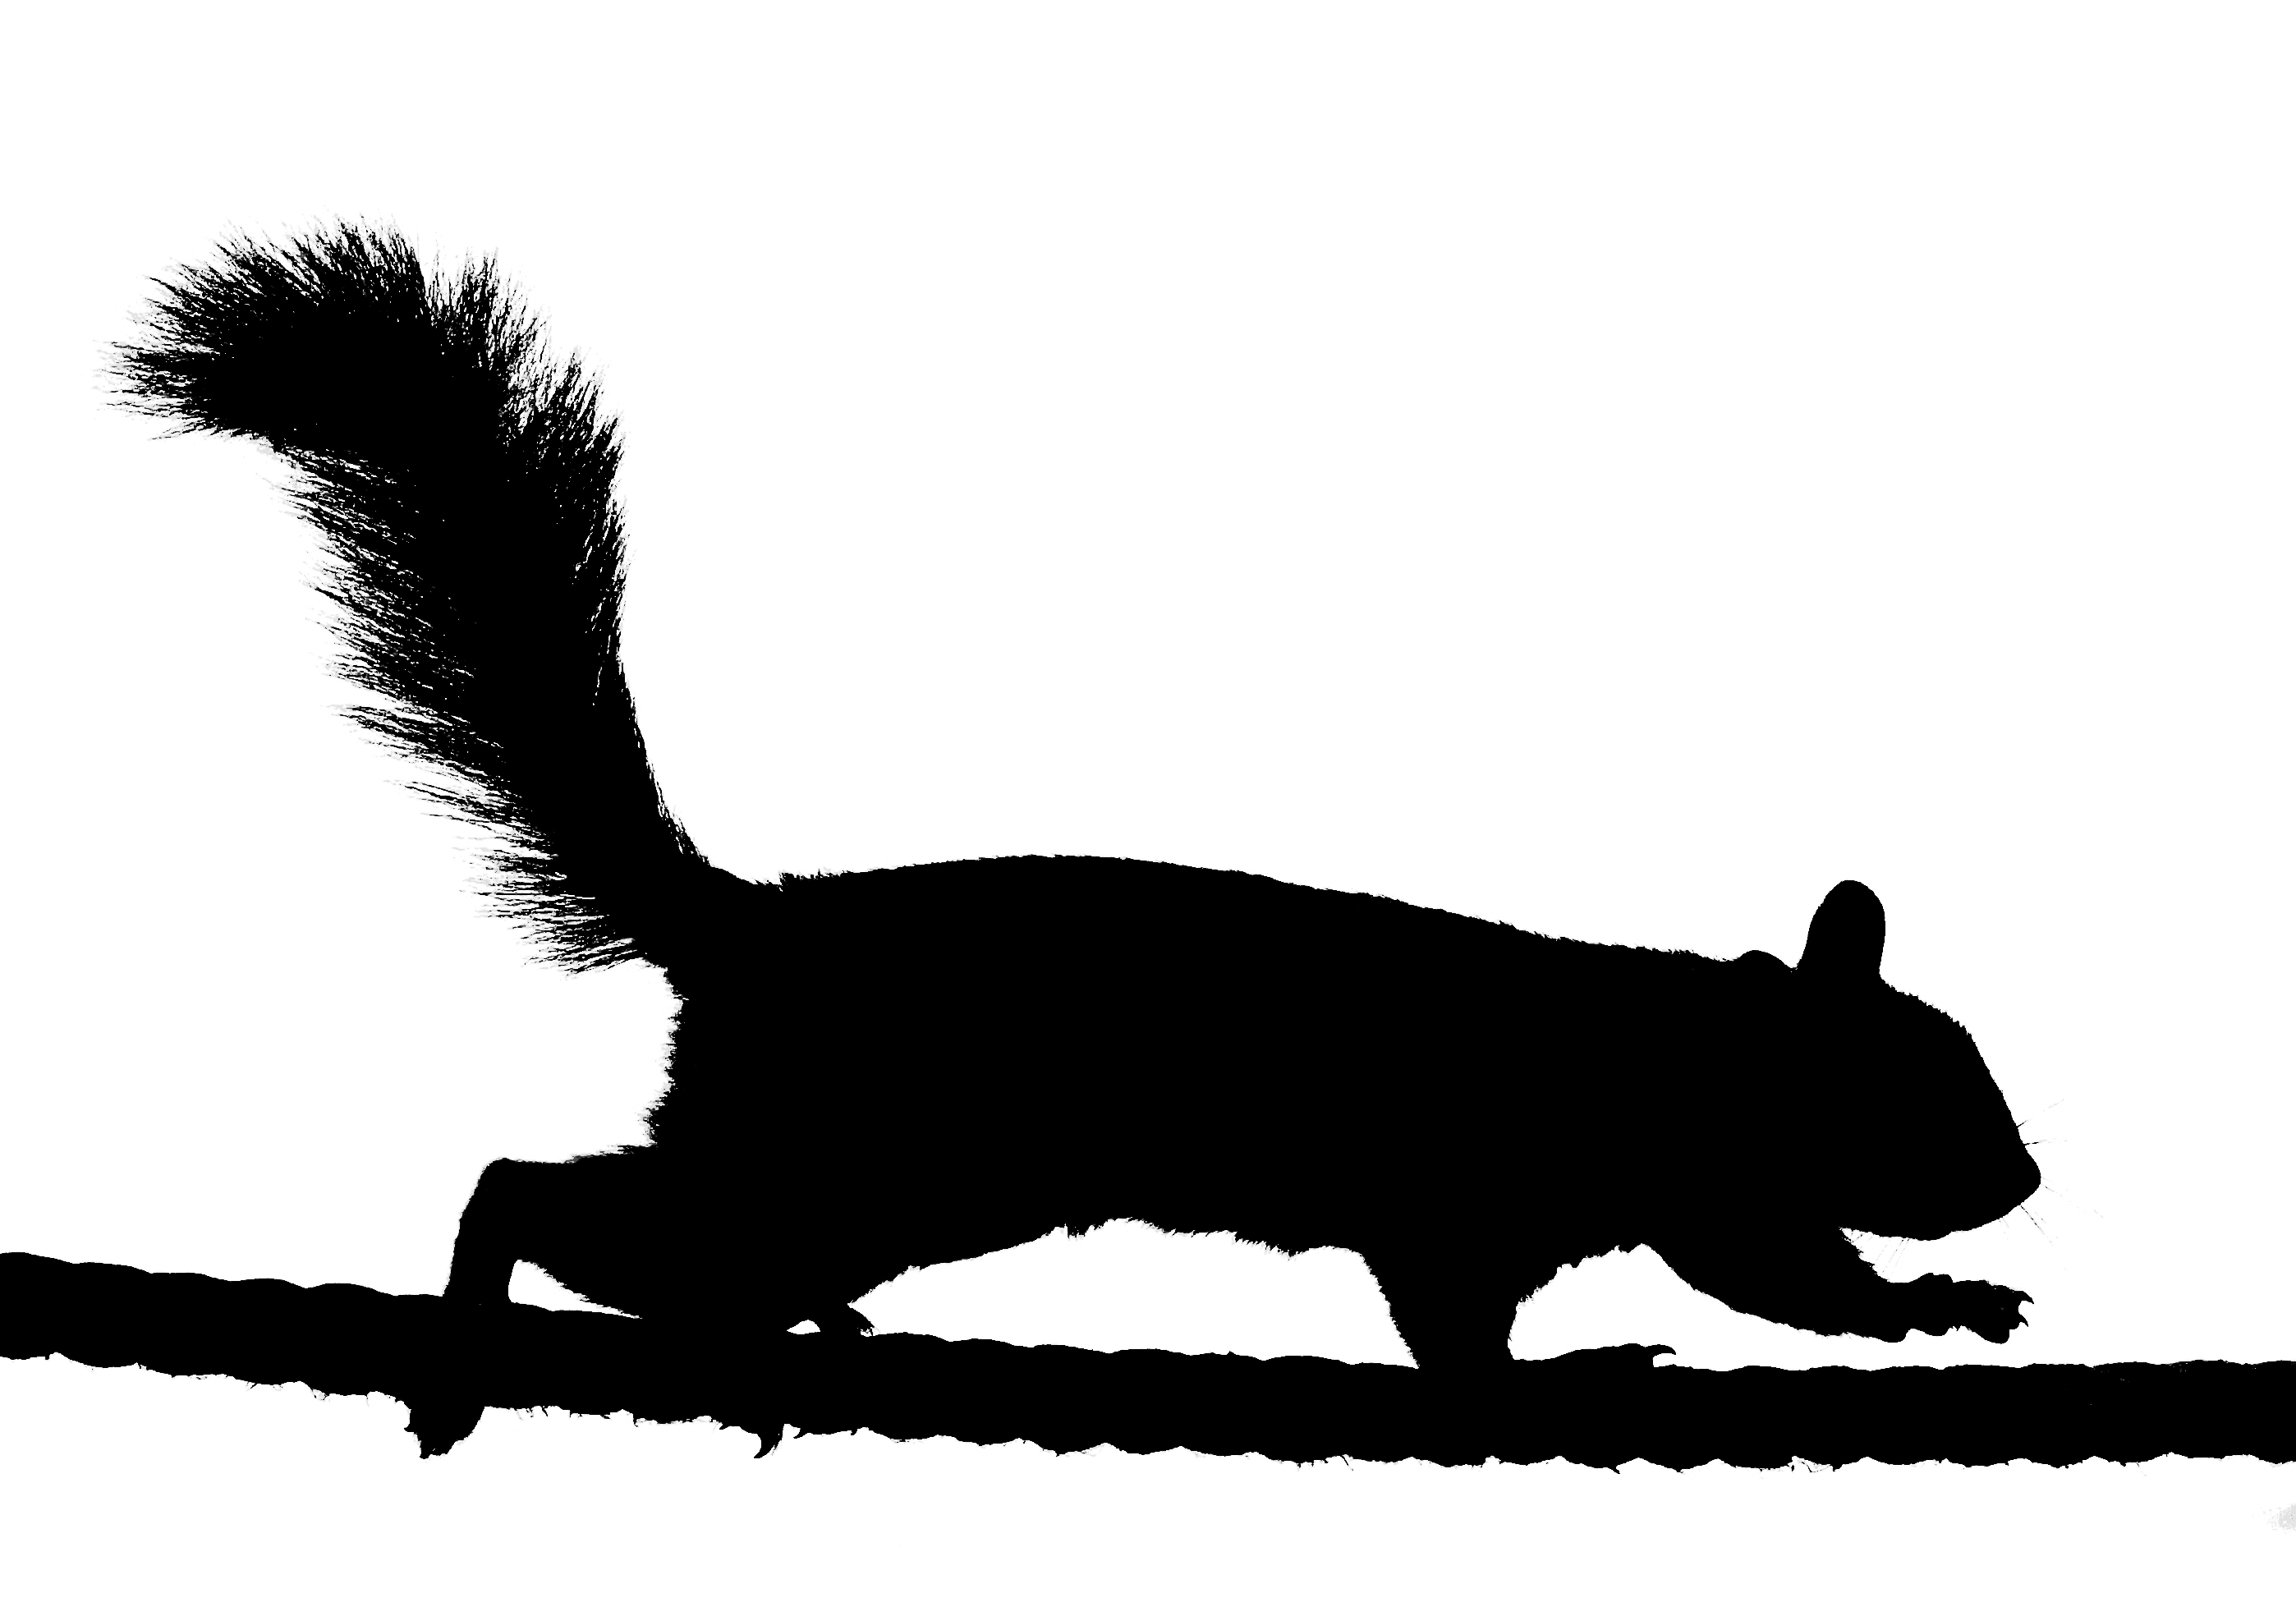 Squirrel silhouette 3 | Flickr - Photo Sharing! ...